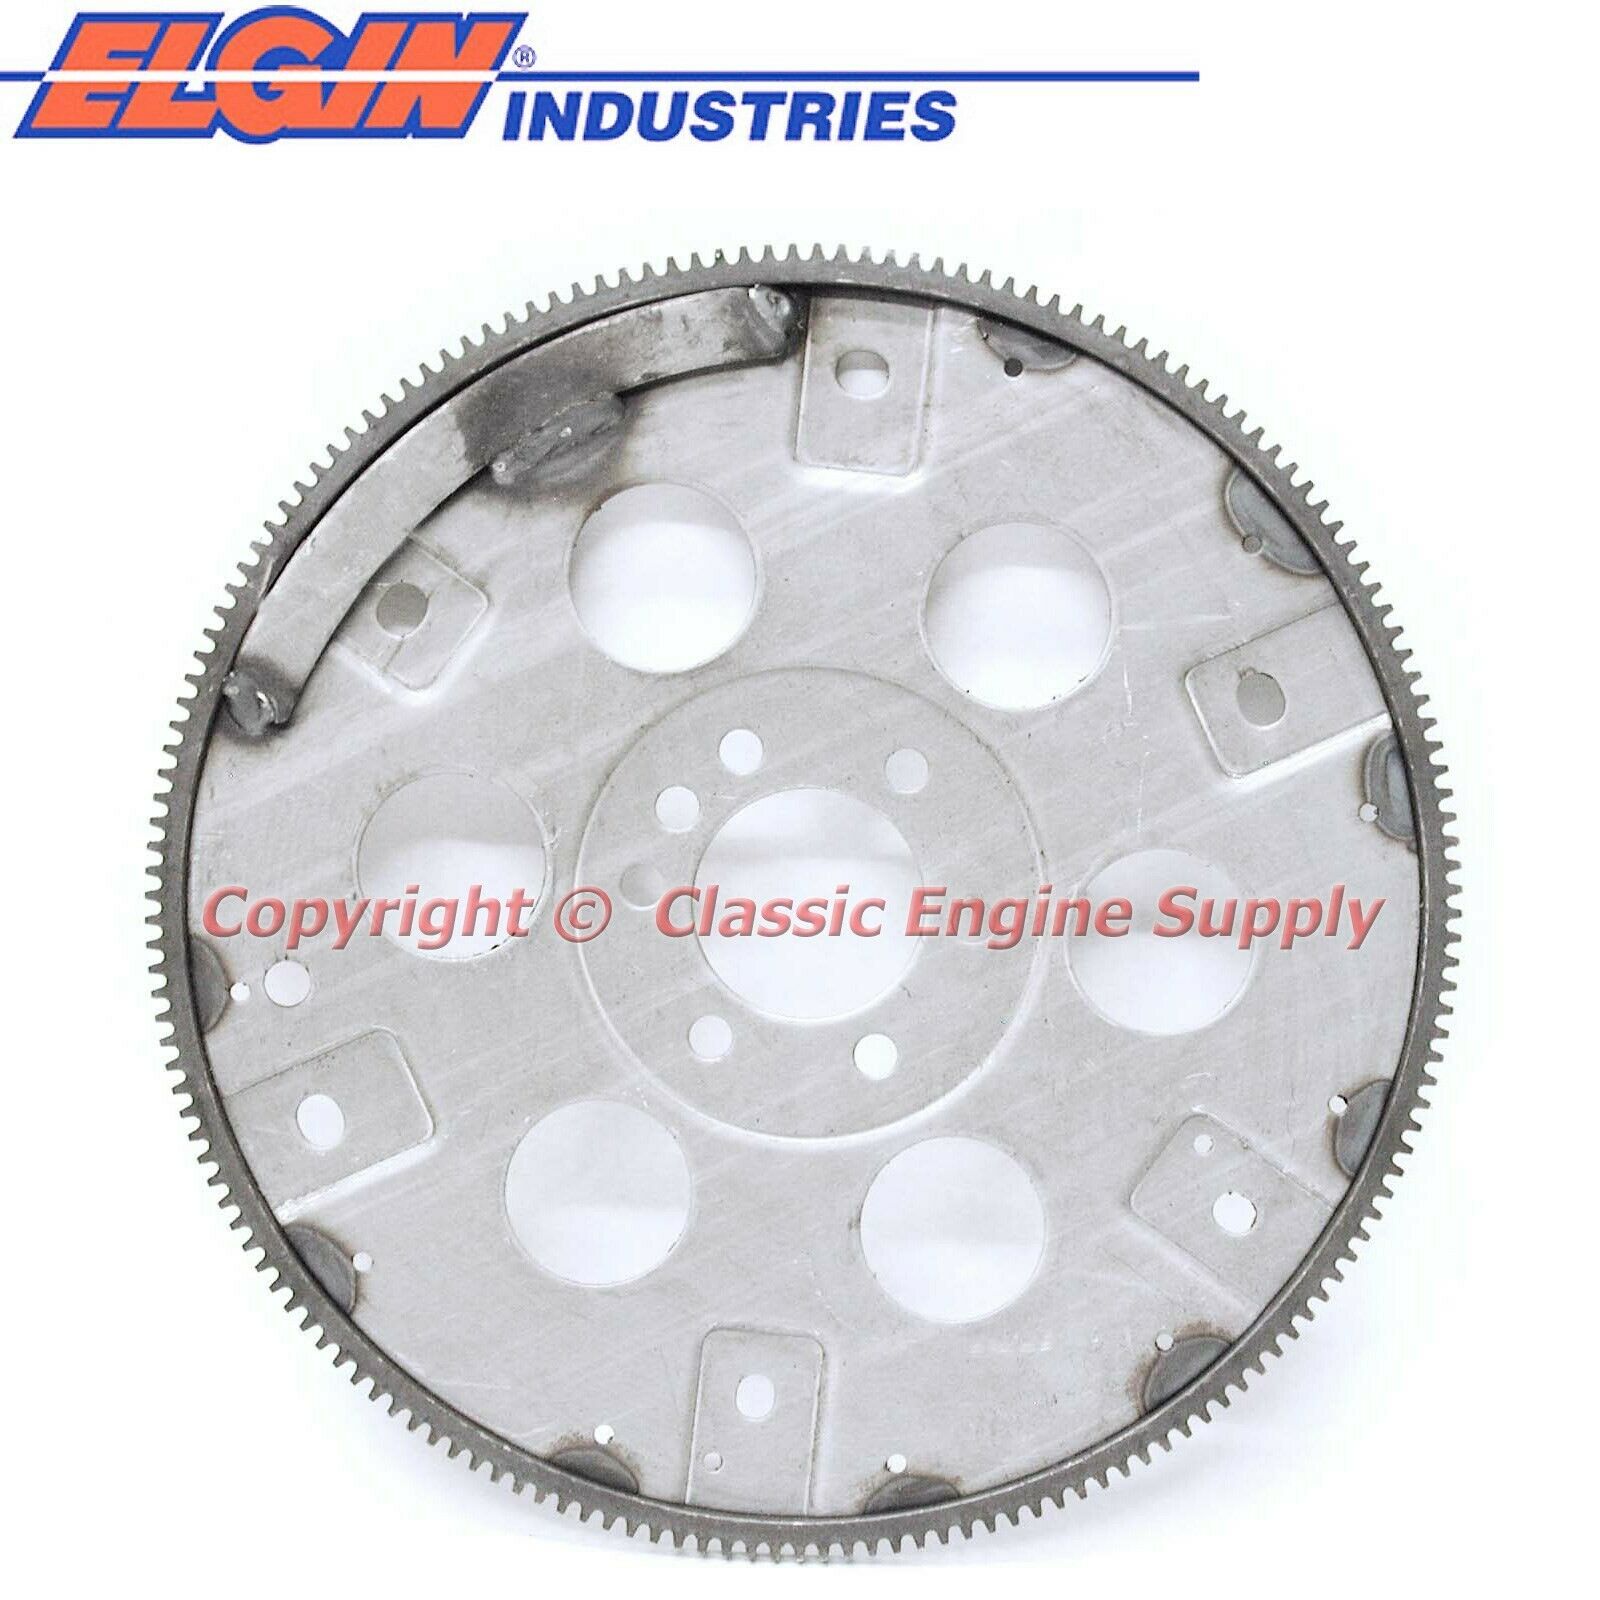 New Automatic Transmission Flexplate Chevy Sb 400 External Balance 168 Tooth